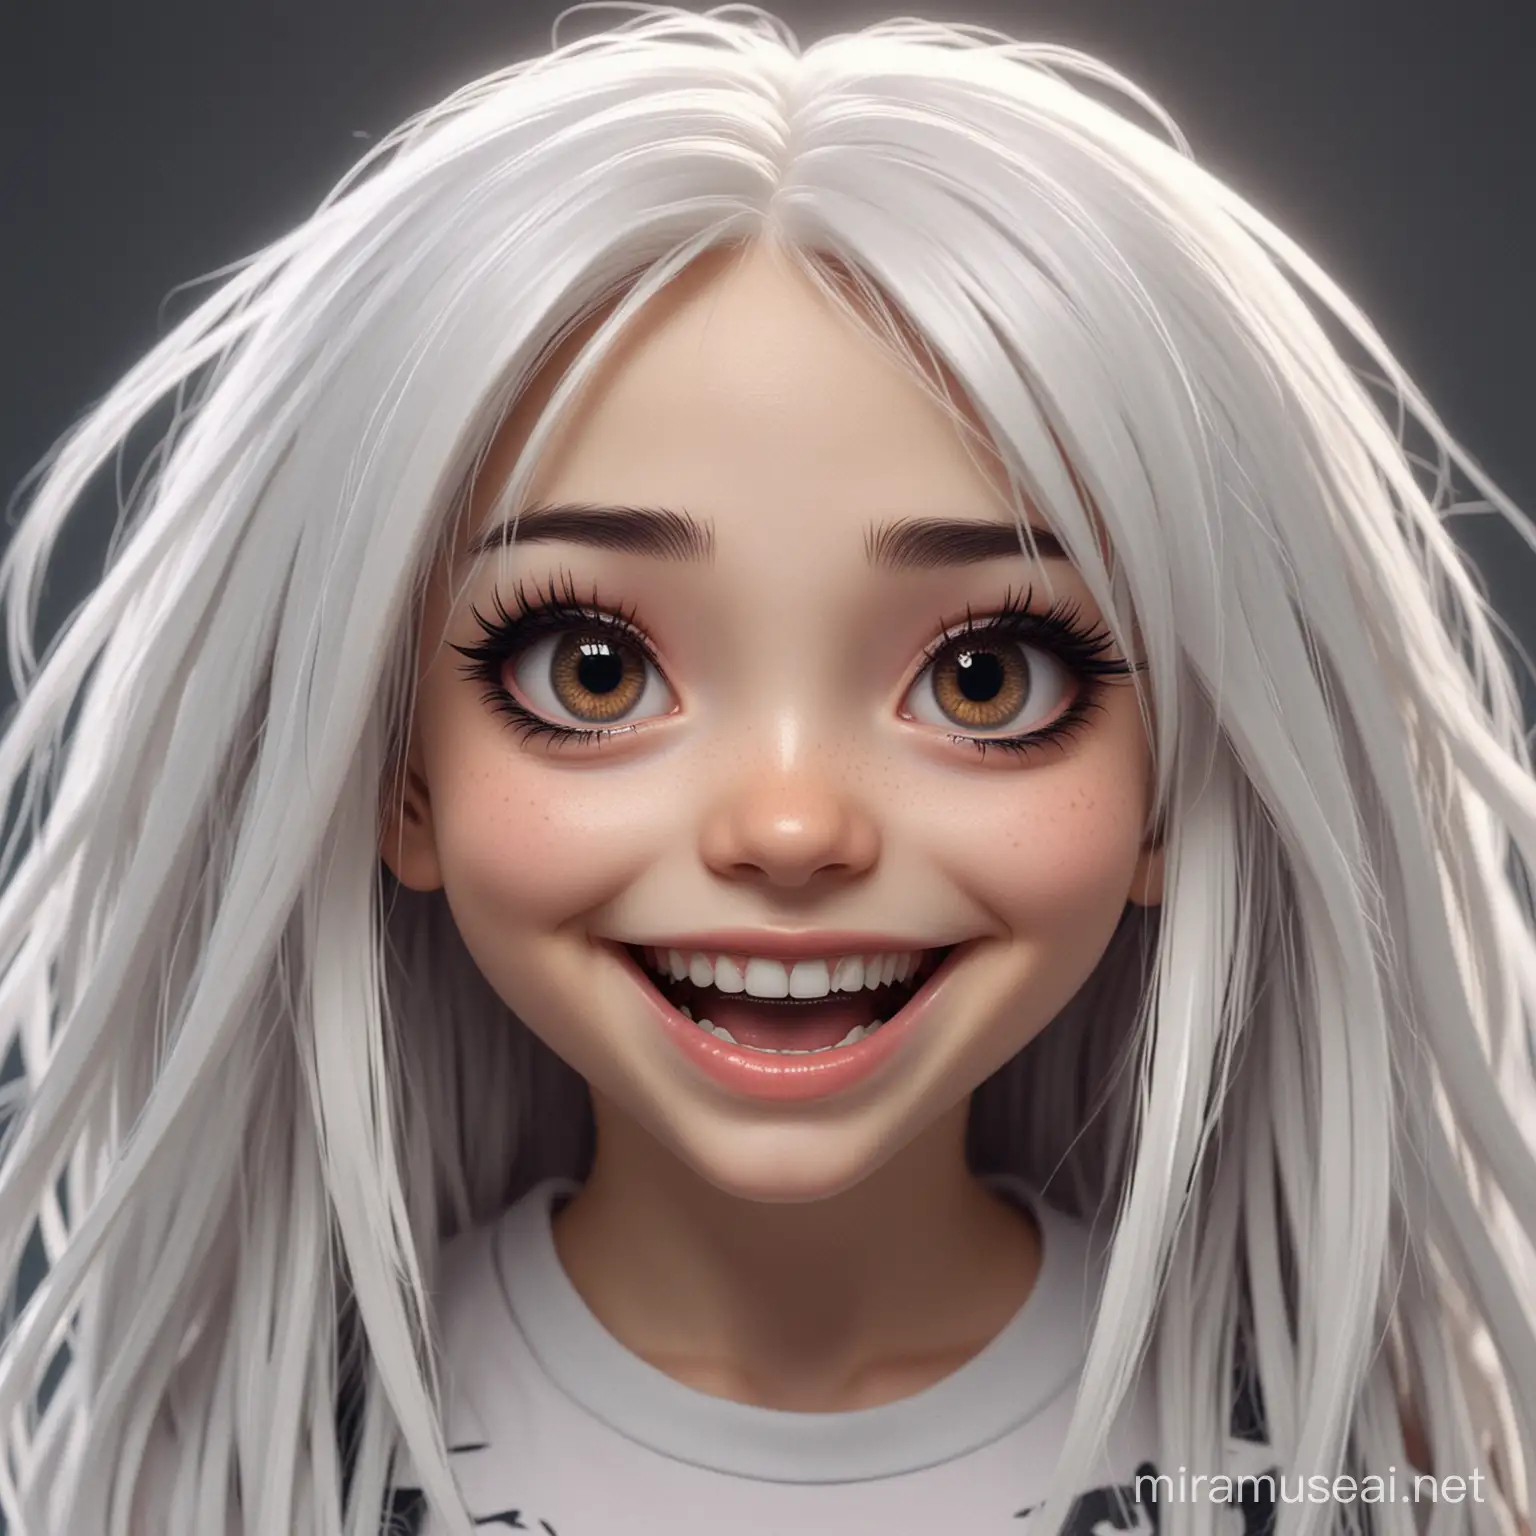 Cute and insane little girl character with long white hair, vibrant psychotic black eyes and a crazy smile filled with razor sharp teeth. 